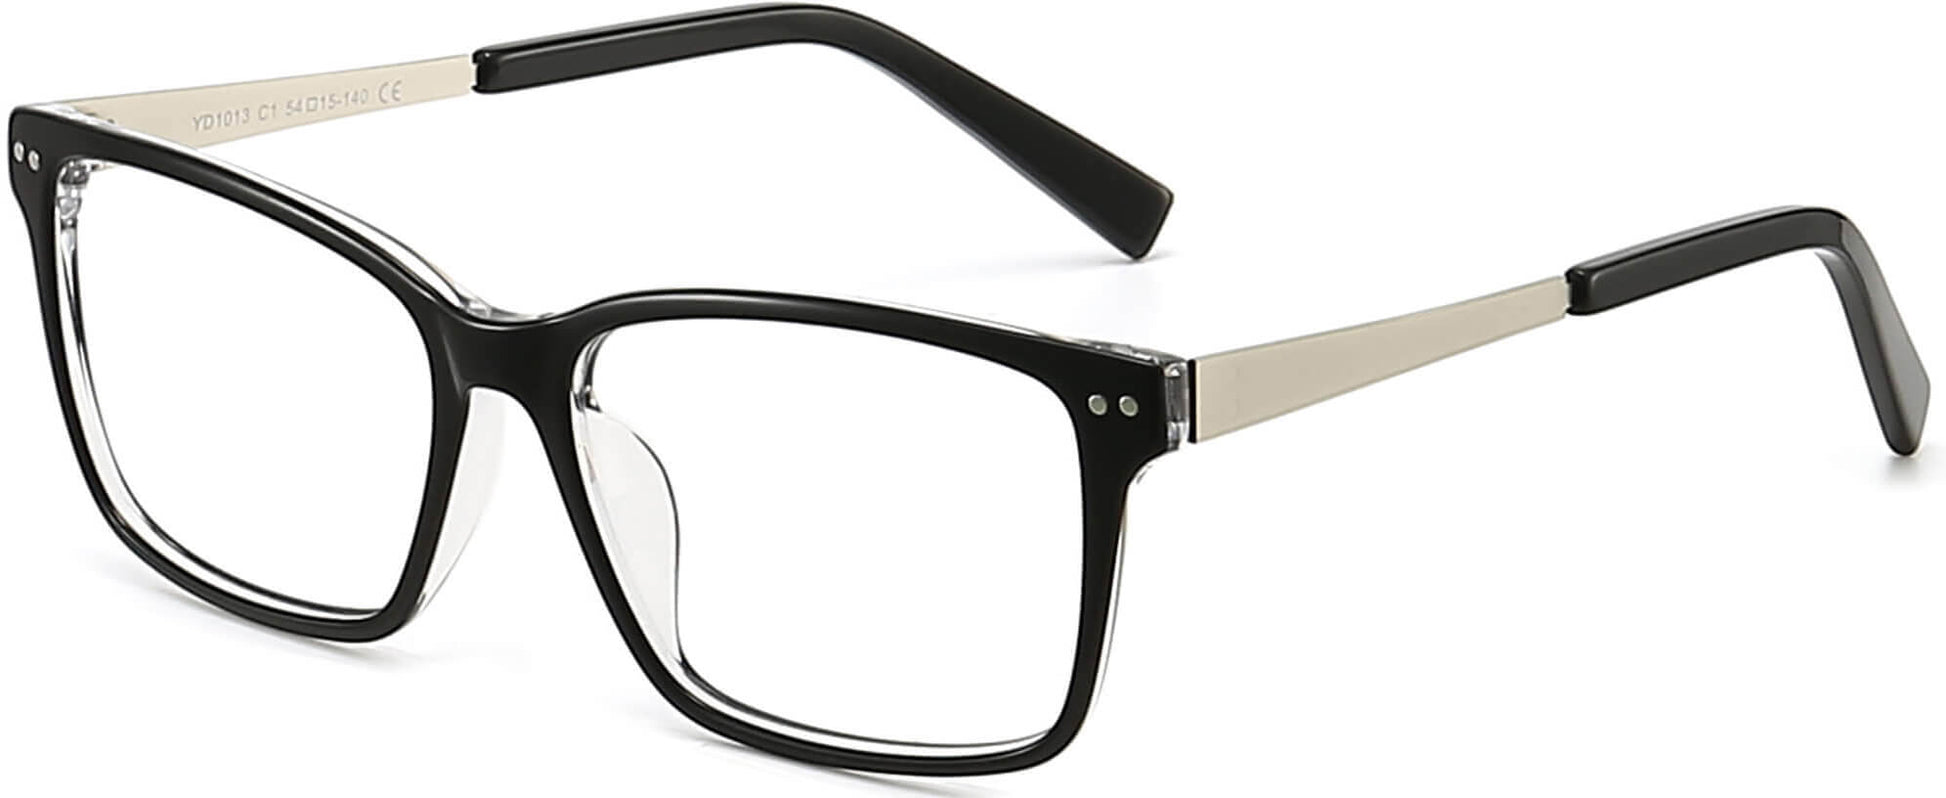 Winston Rectangle Black Eyeglasses from ANRRI, angle view